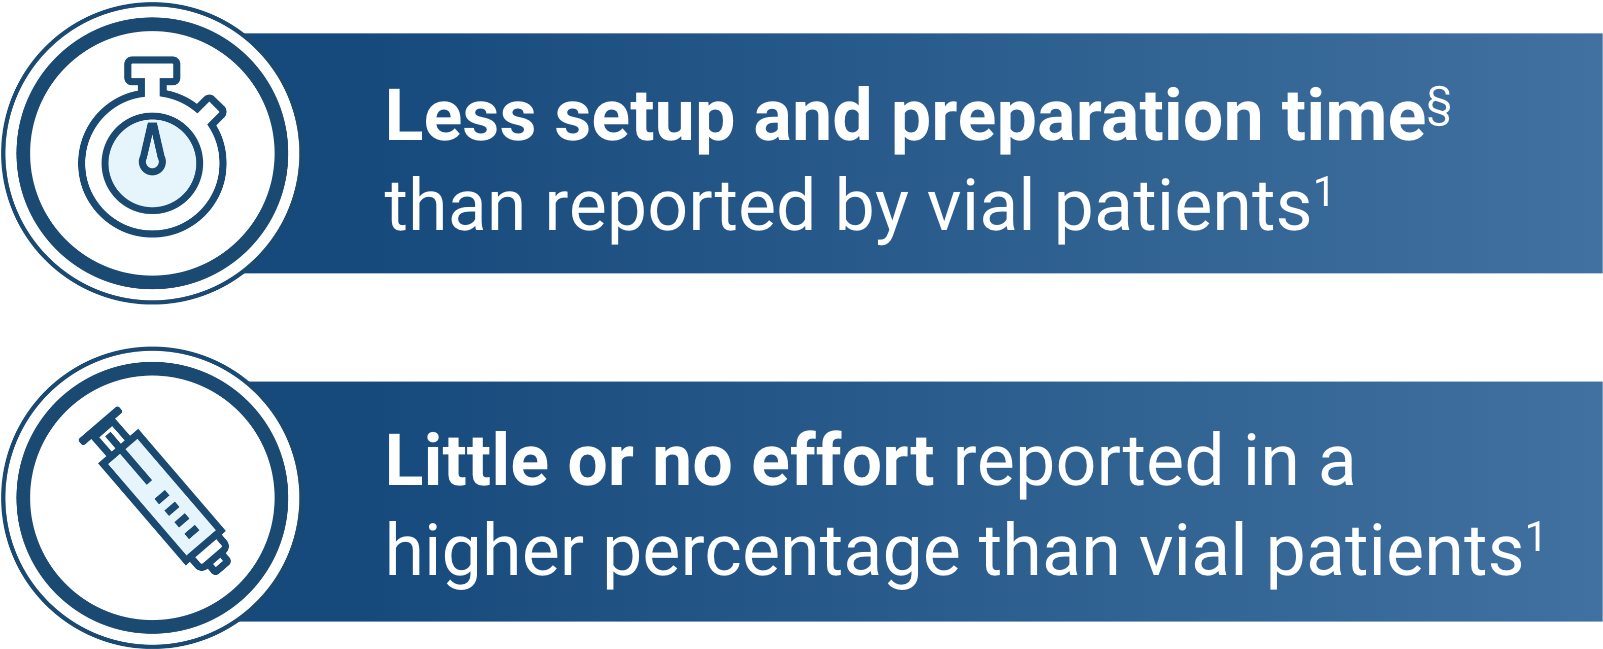 Less setup and preparation time than reported by vial patients